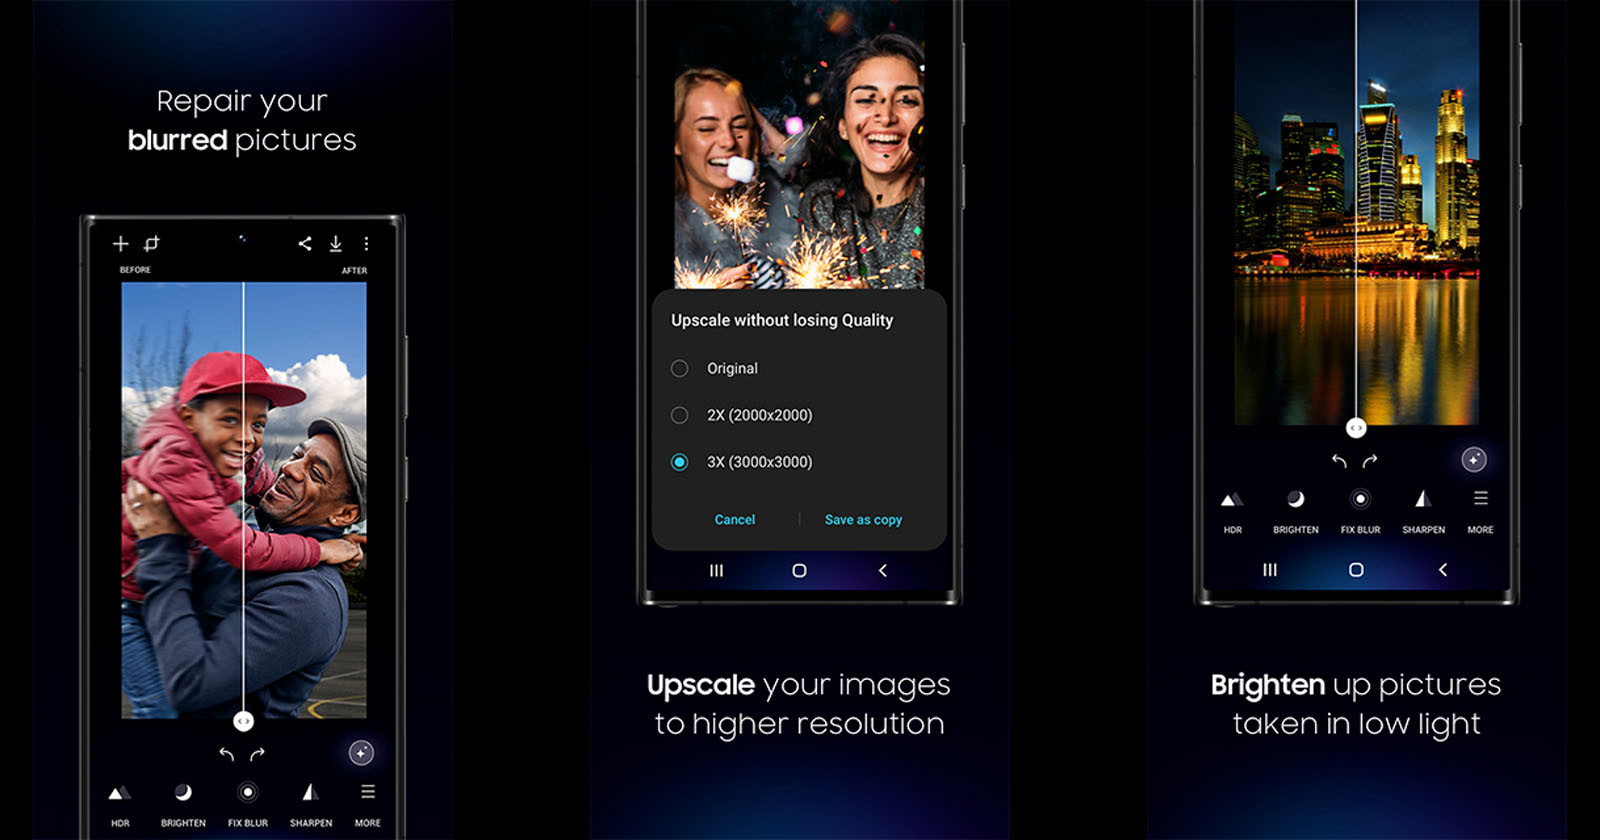  samsung relaunches its photo editing app 